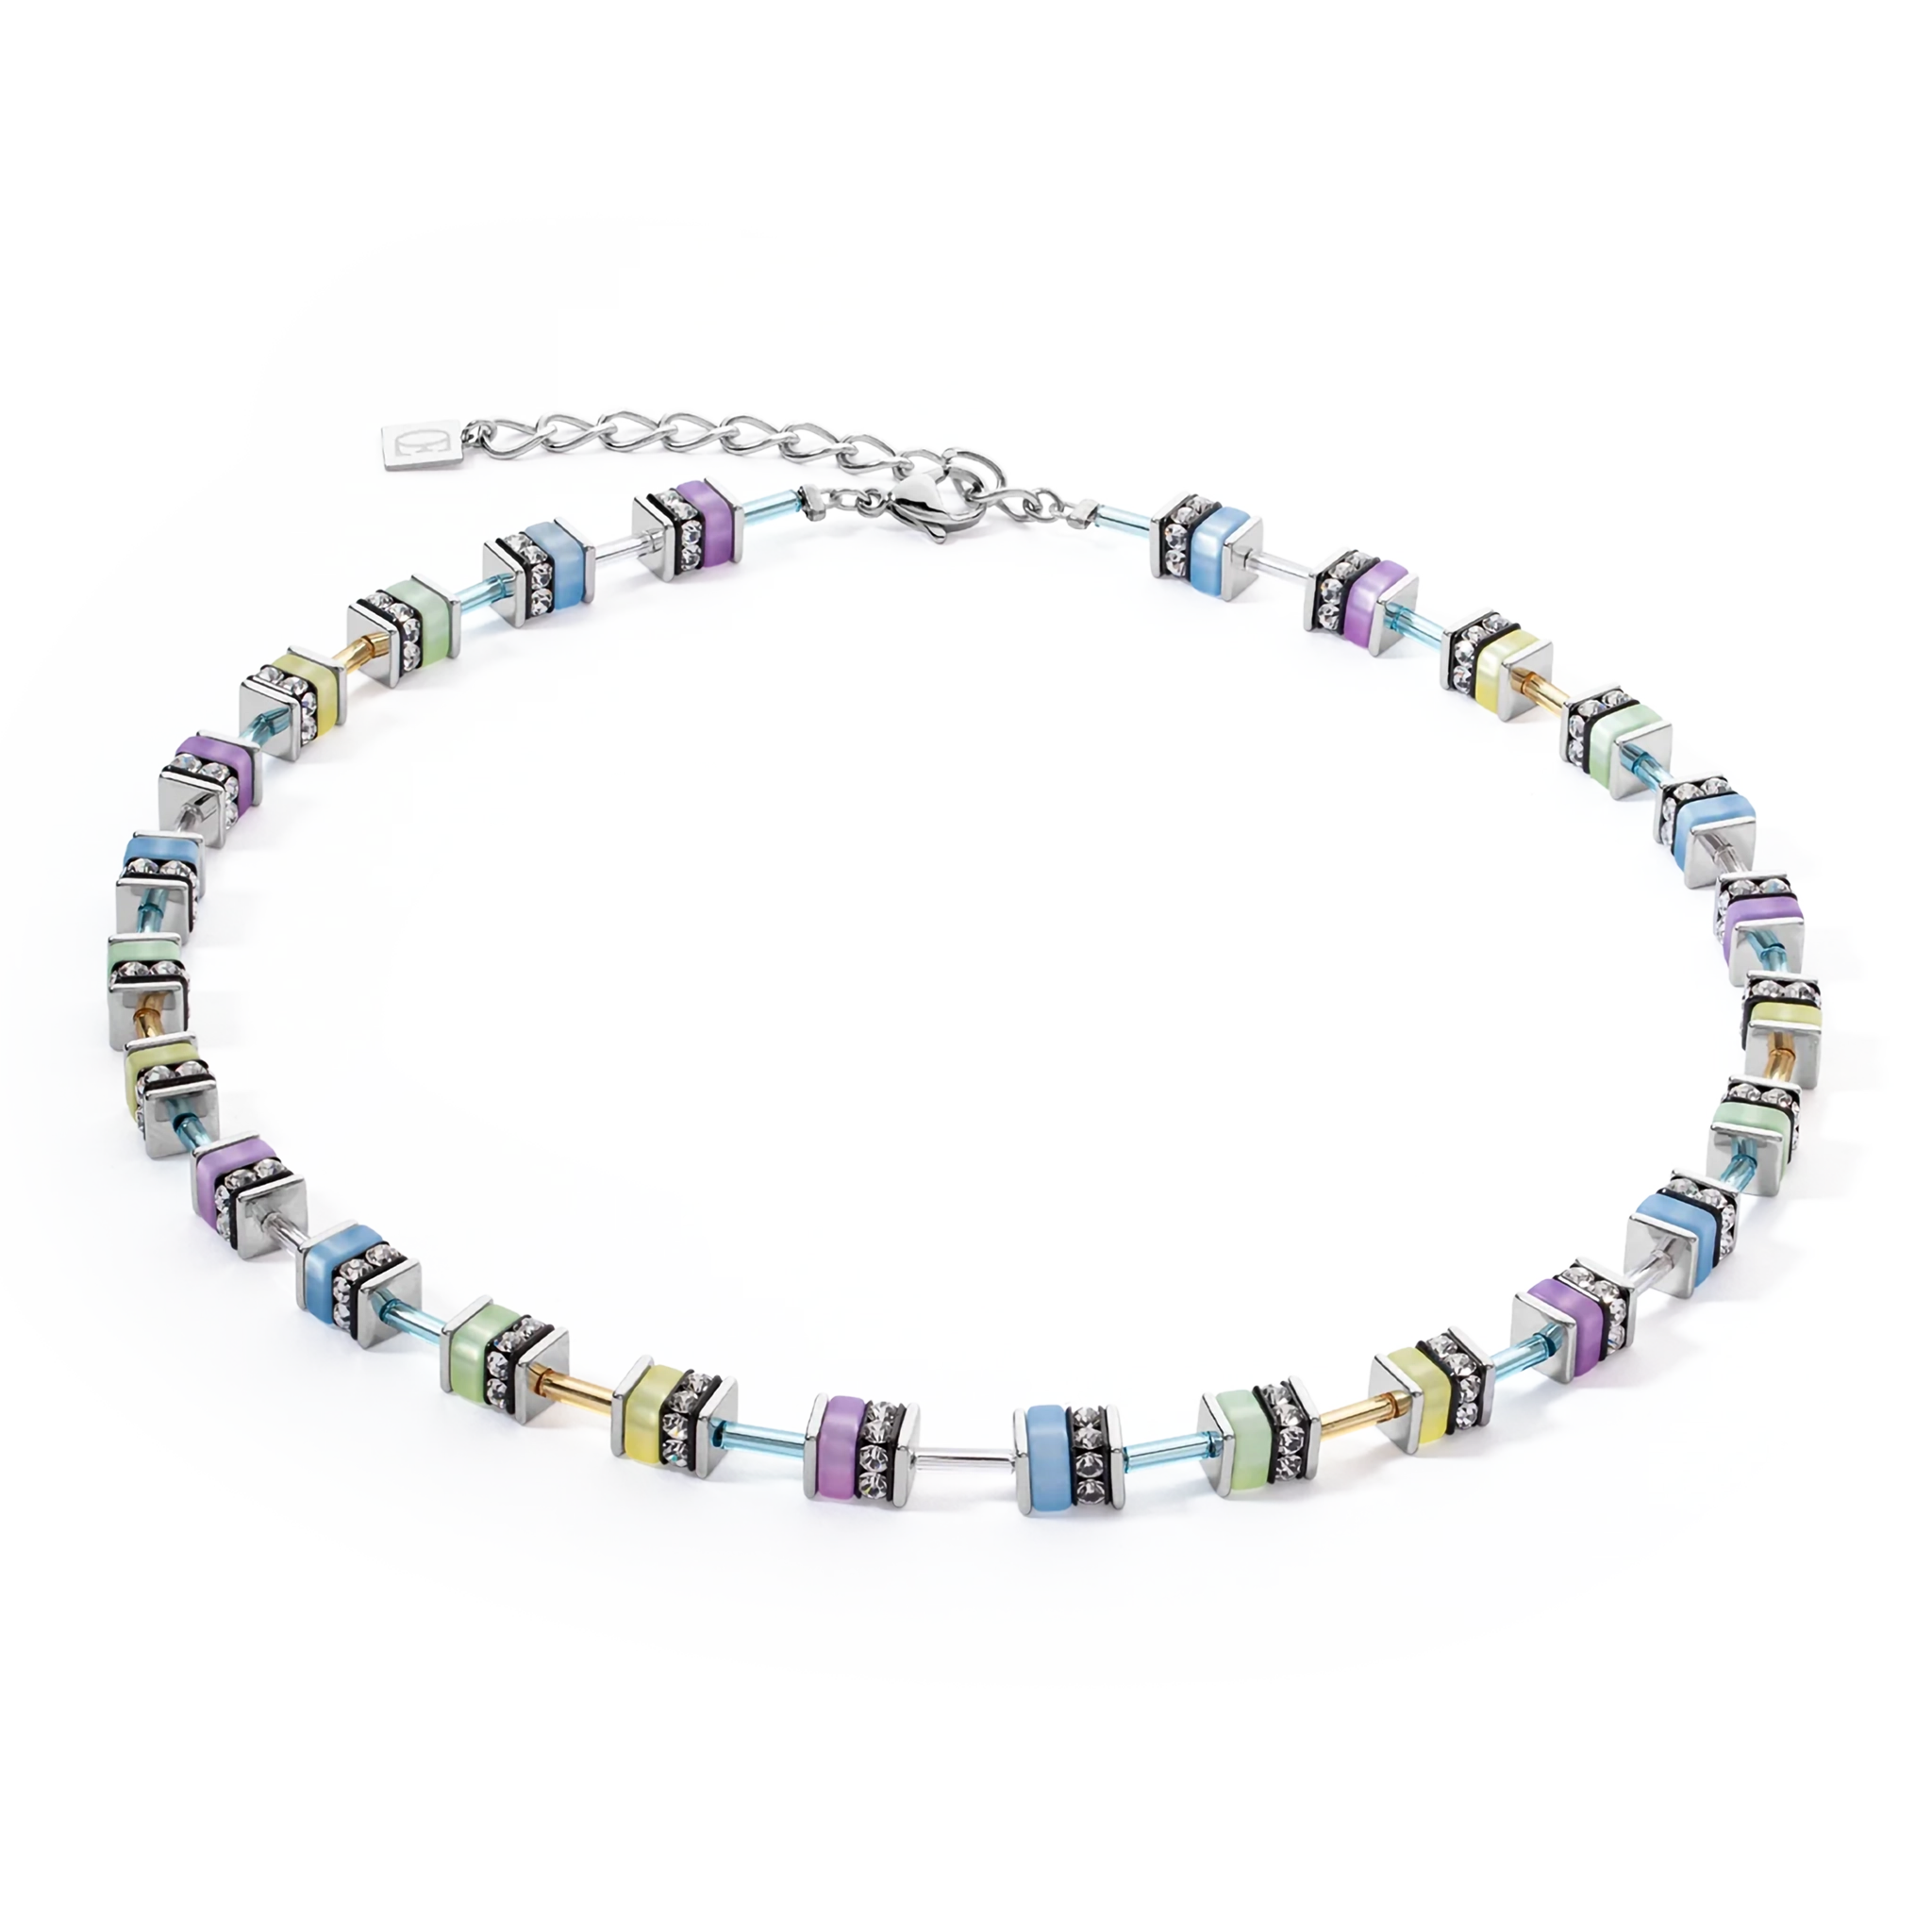 A steel necklace with pastel coloured stones